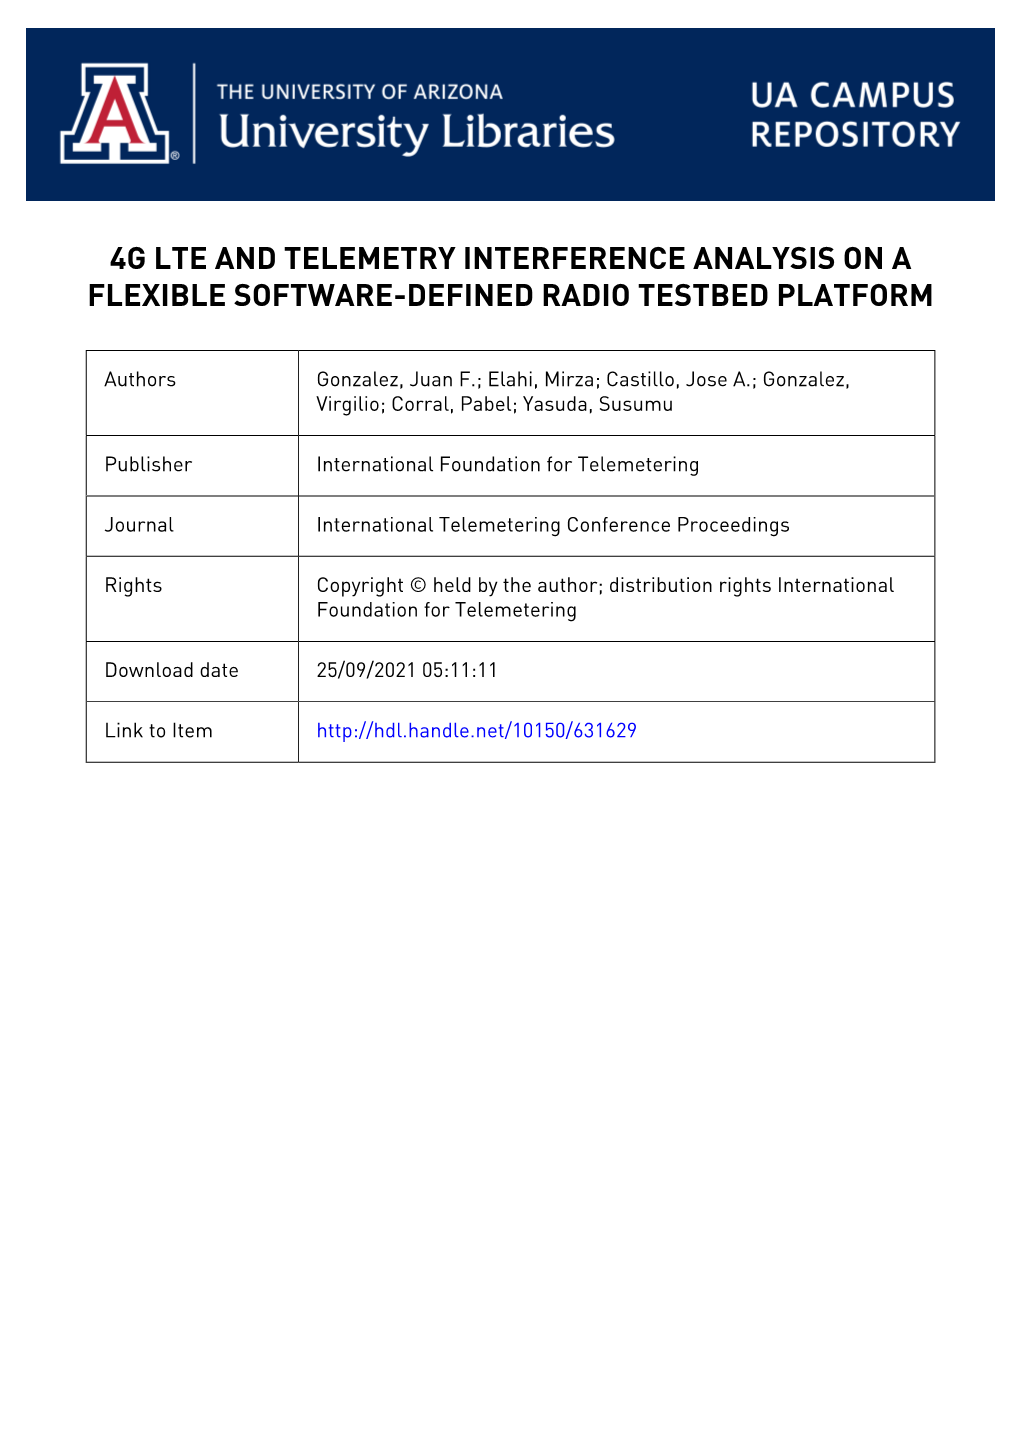 4G Lte and Telemetry Interference Analysis on a Flexible Software-Defined Radio Testbed Platform